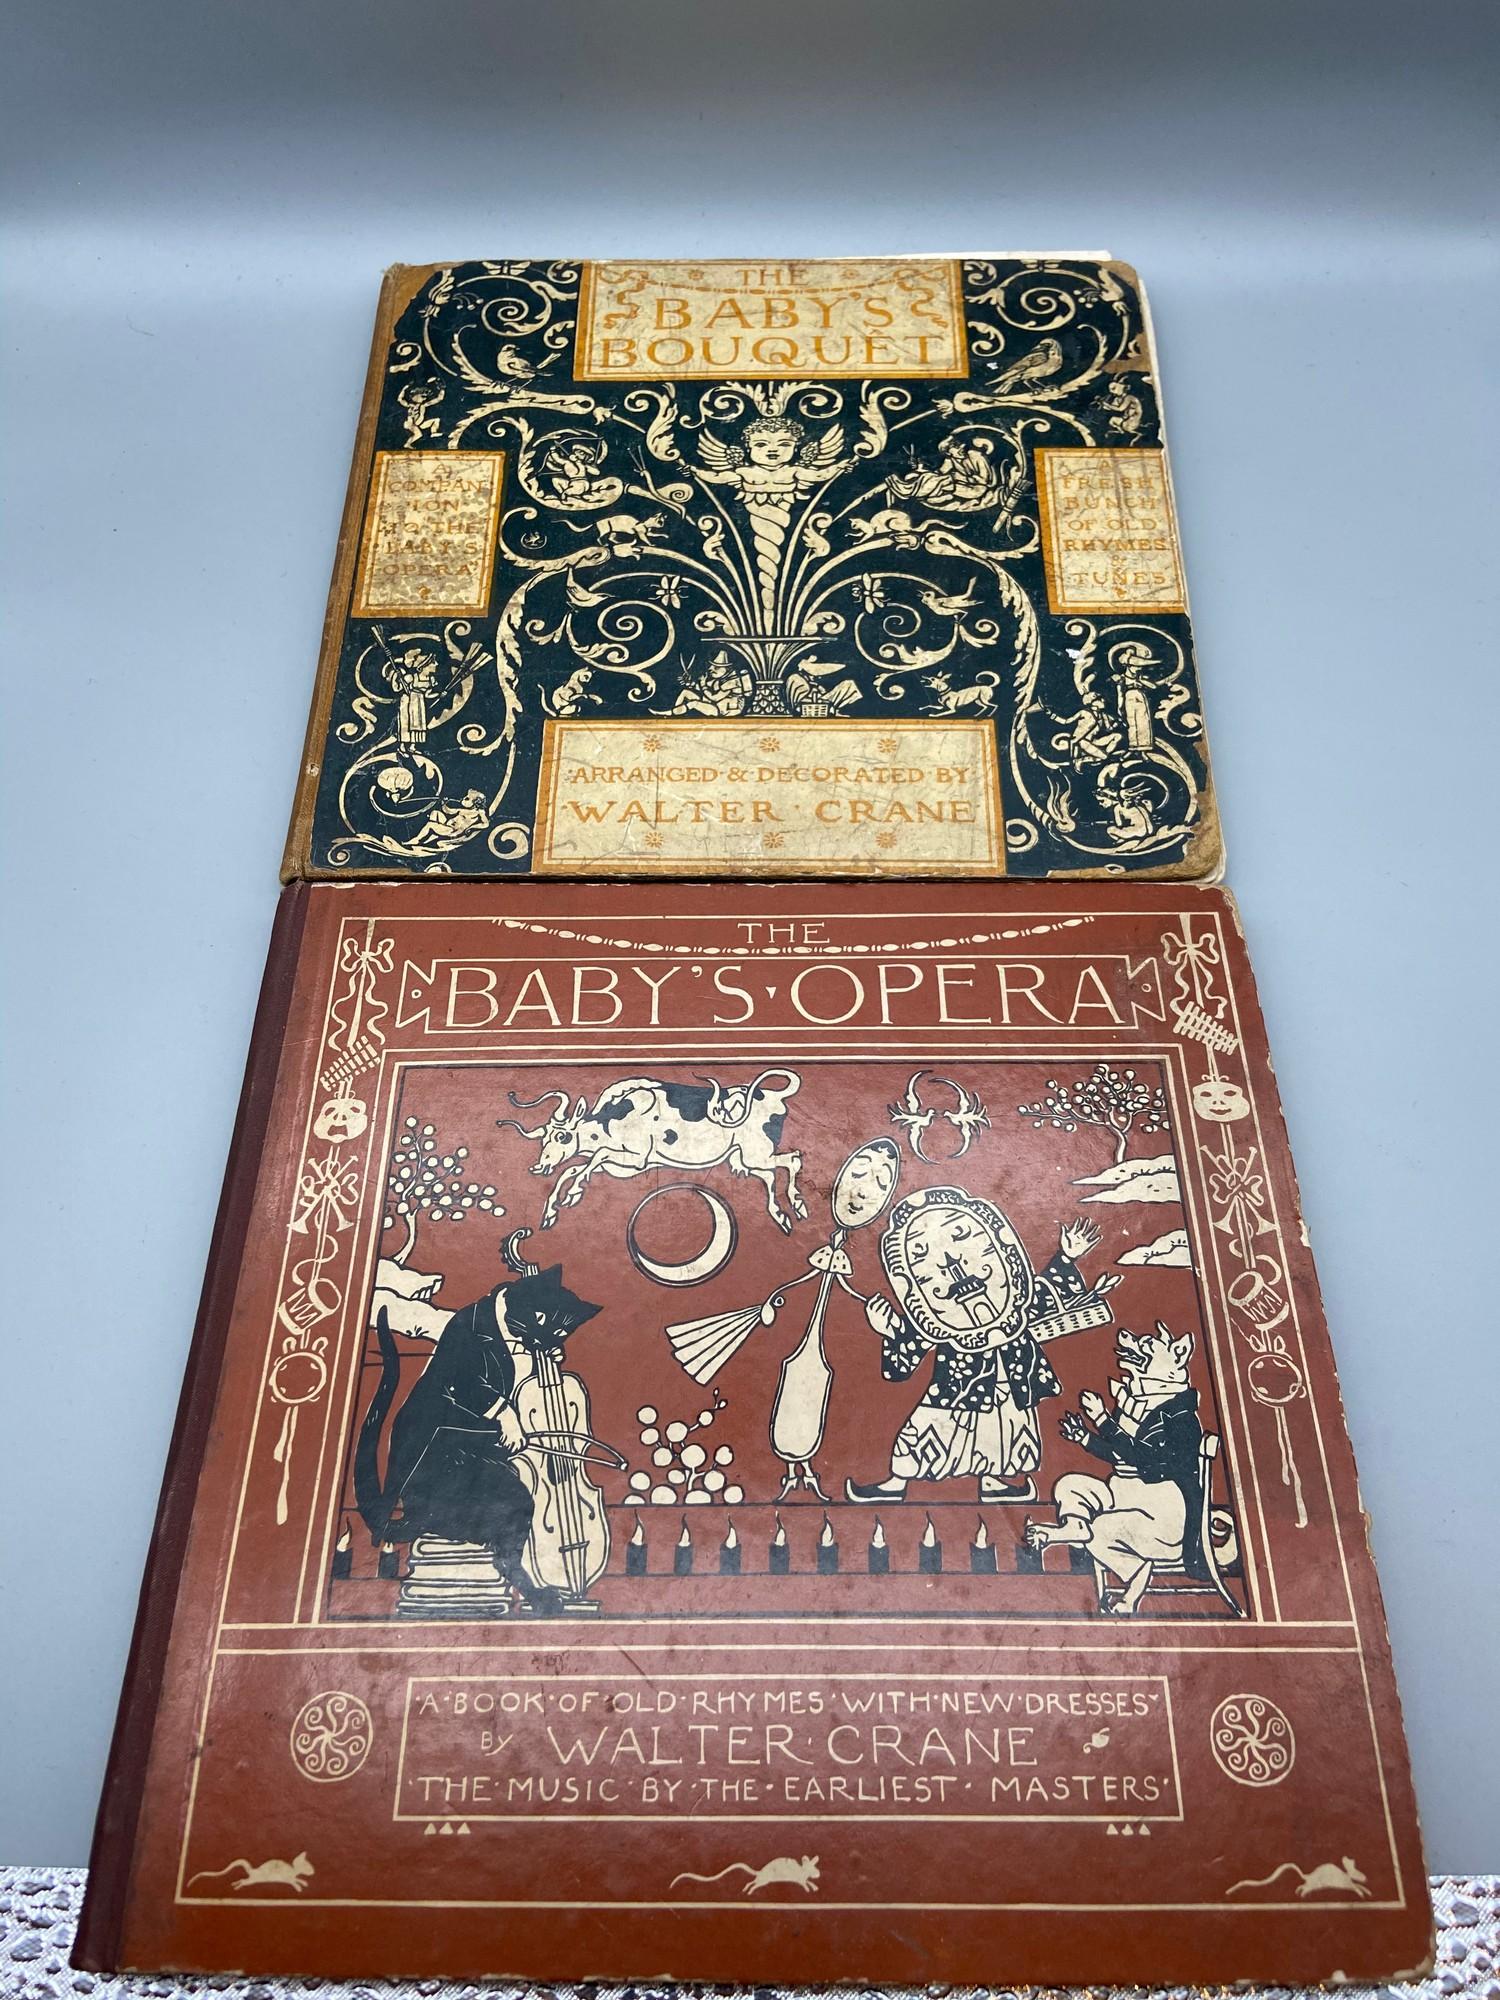 Two antique books- The Baby's Bouquet and The Baby's Opera by Walter Crane.